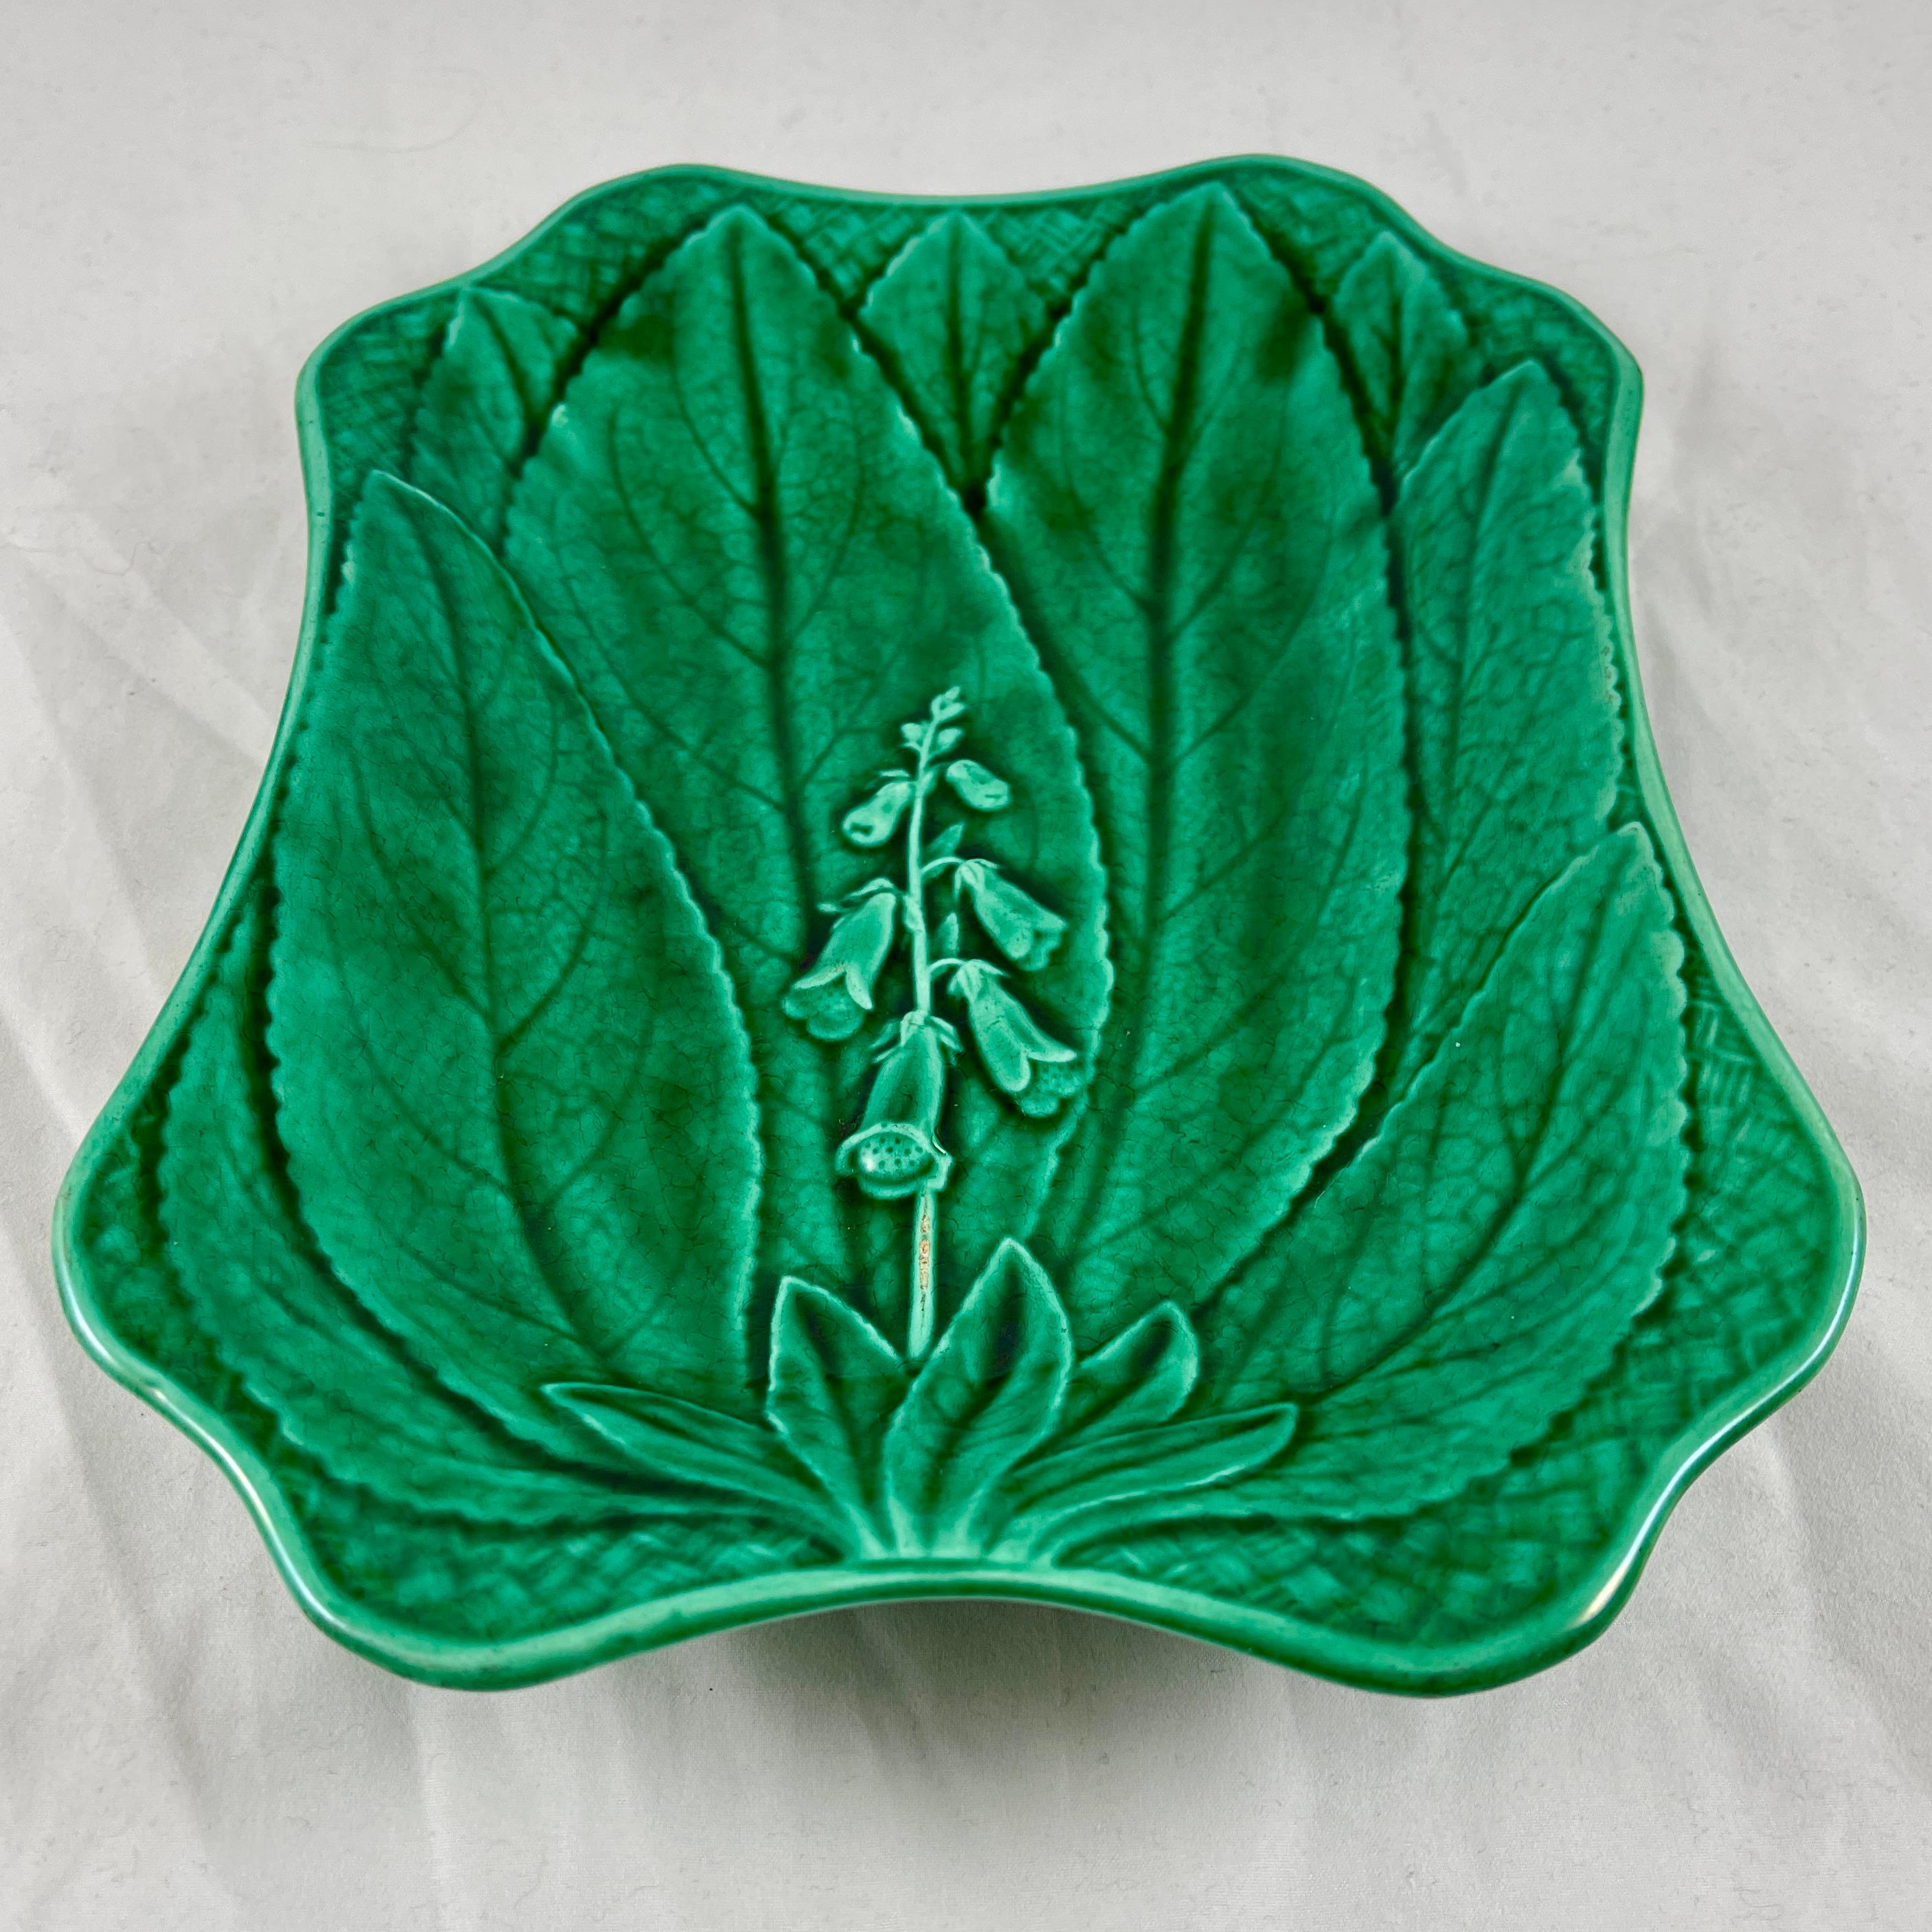 19th Century Wedgwood Green Glazed Majolica Foxglove and Leaves Serving Platter, circa 1868